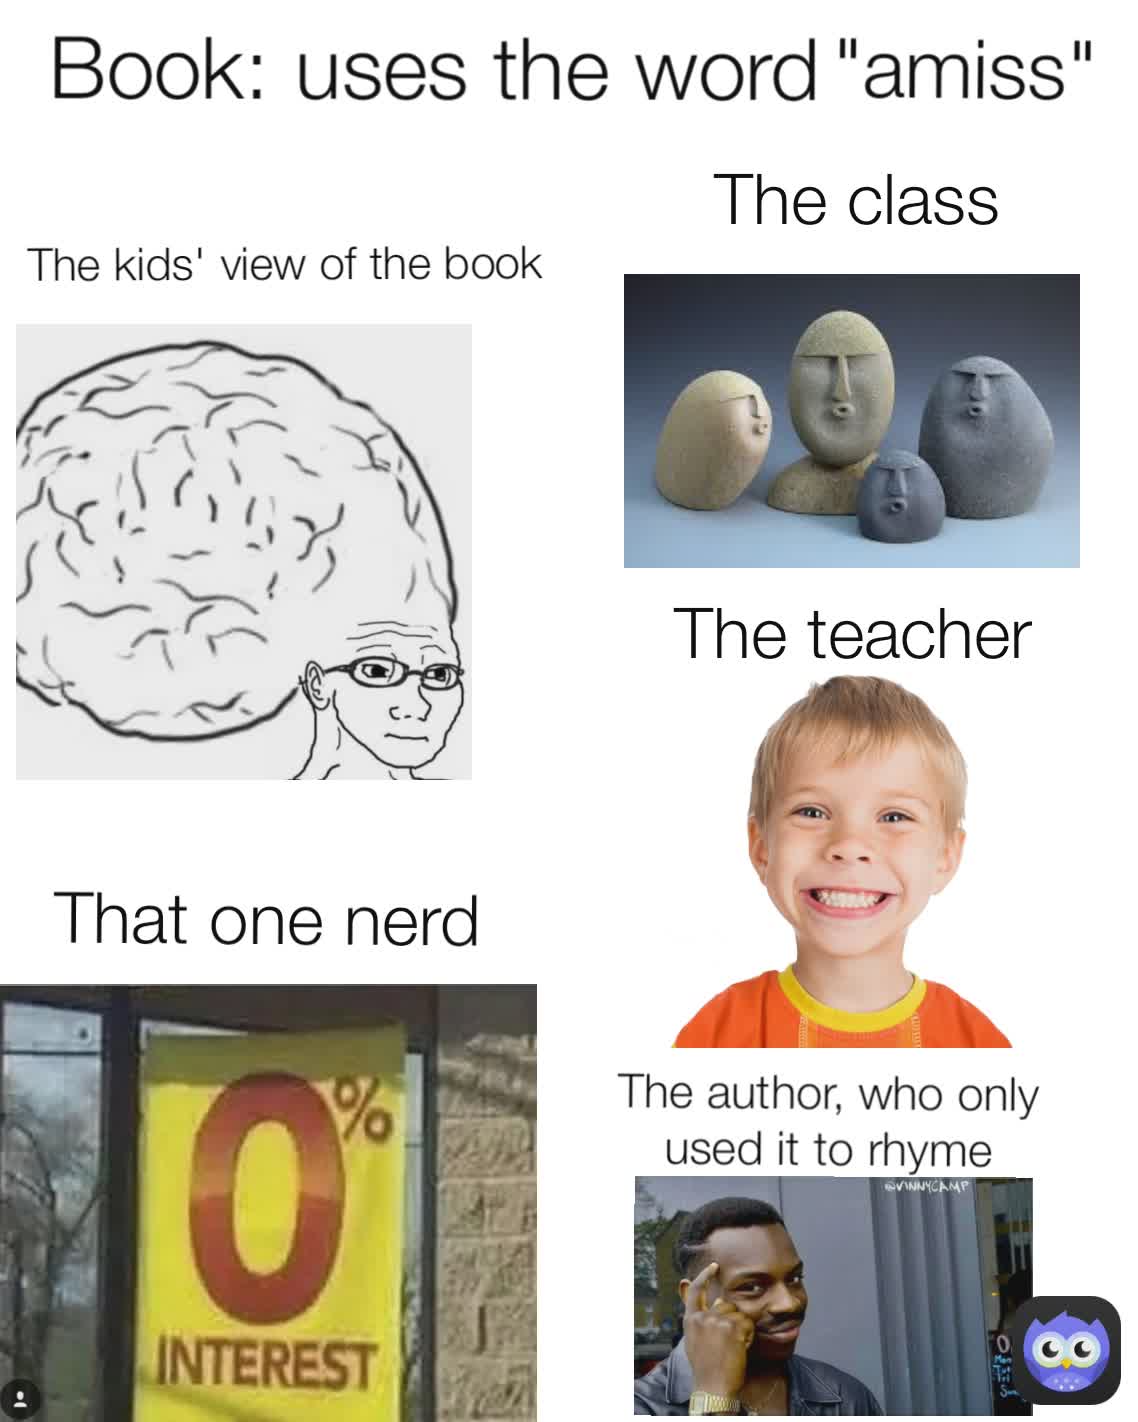 "amiss" The teacher The kids' view of the book Book: uses the word That one nerd The author, who only used it to rhyme The class